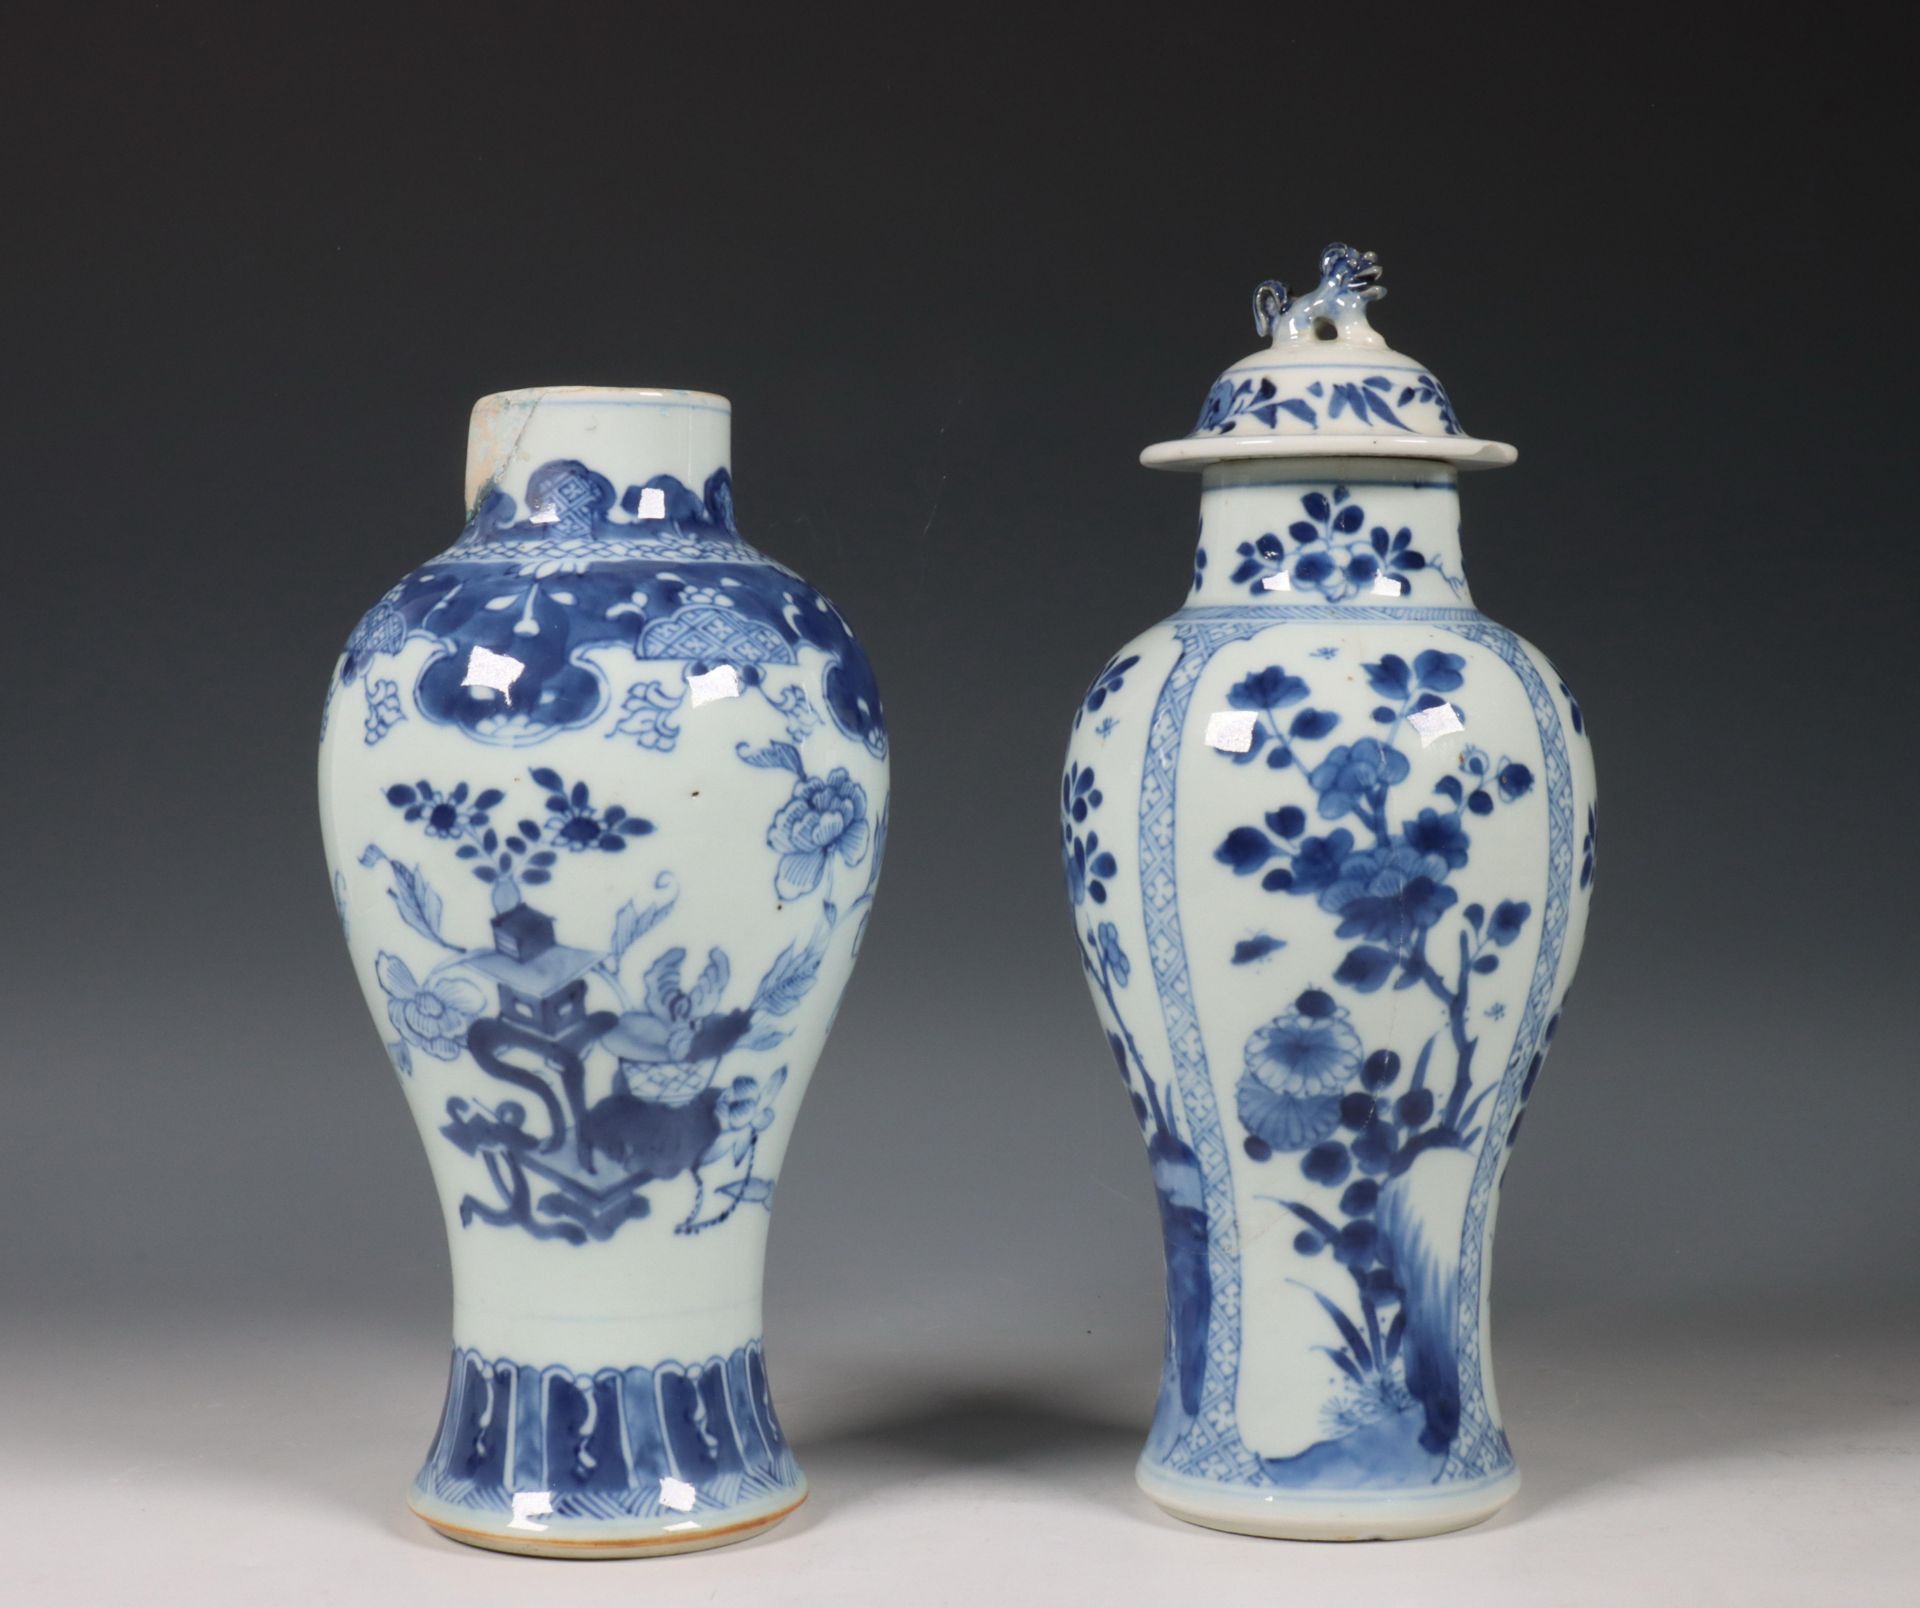 China, two blue and white porcelain baluster vases, Qianlong period (1736-1795), - Image 2 of 6